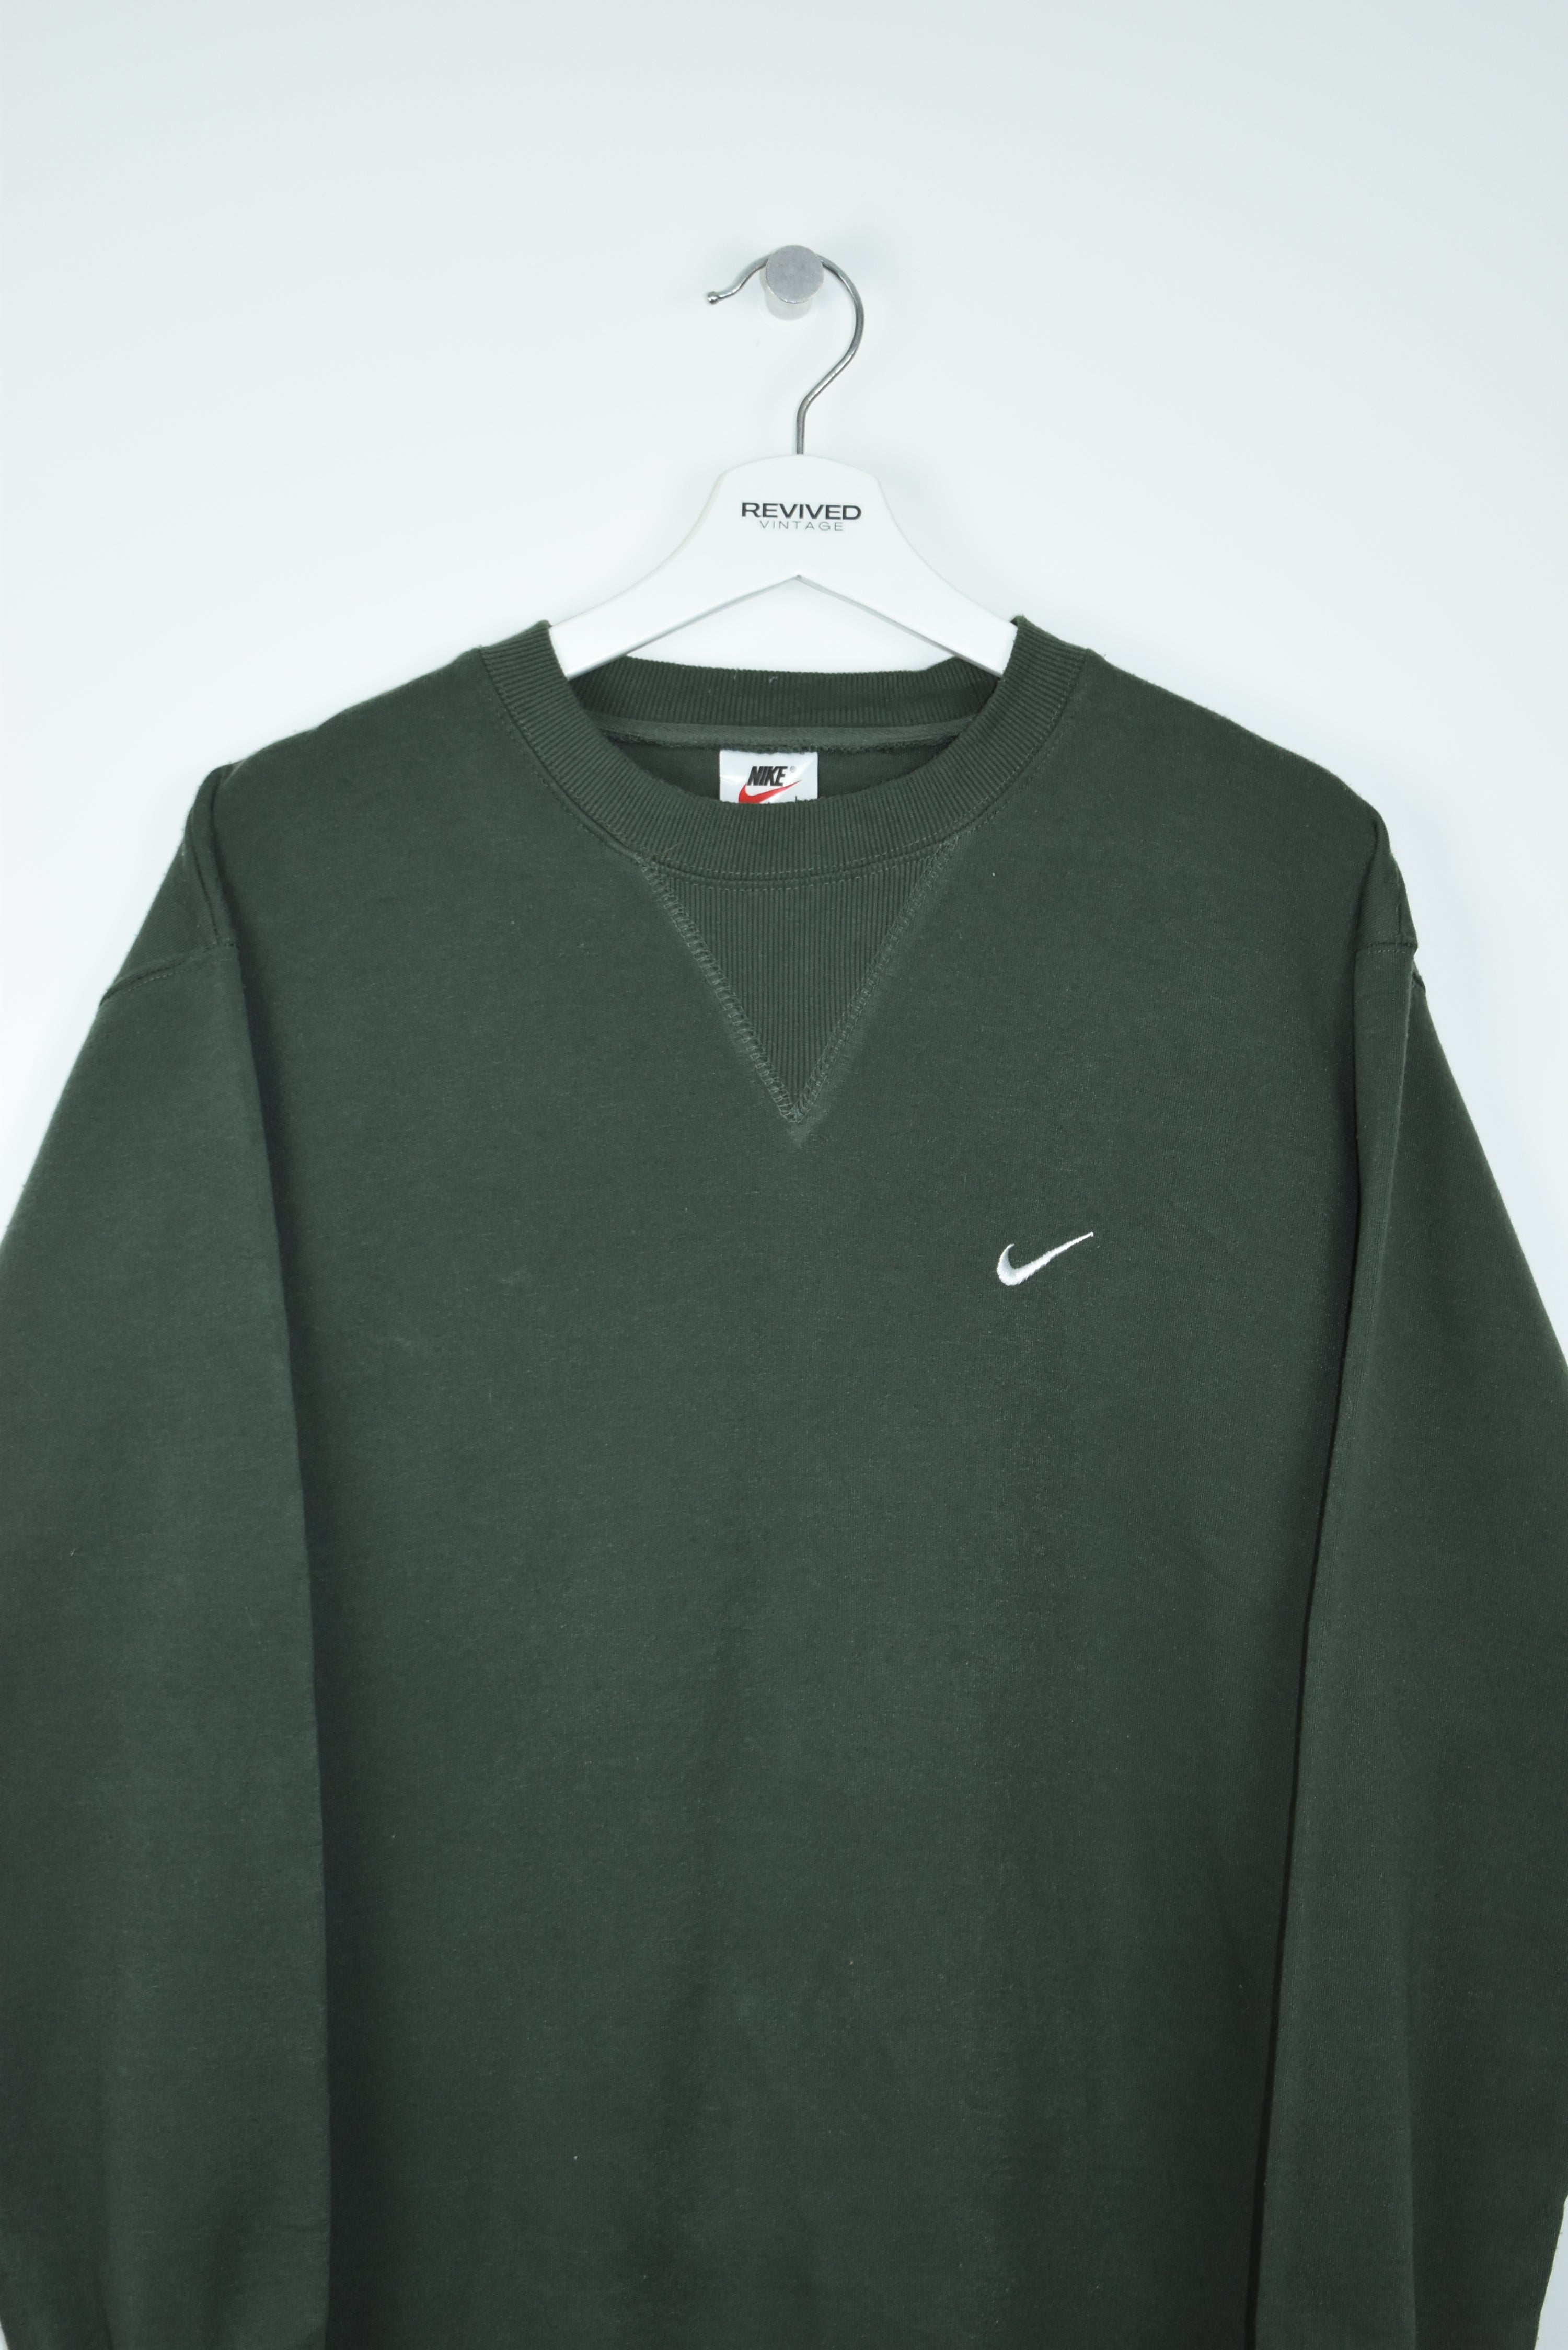 VINTAGE NIKE EMBROIDERY SMALL LOGO SWEATSHIRT FORREST GREEN LARGE